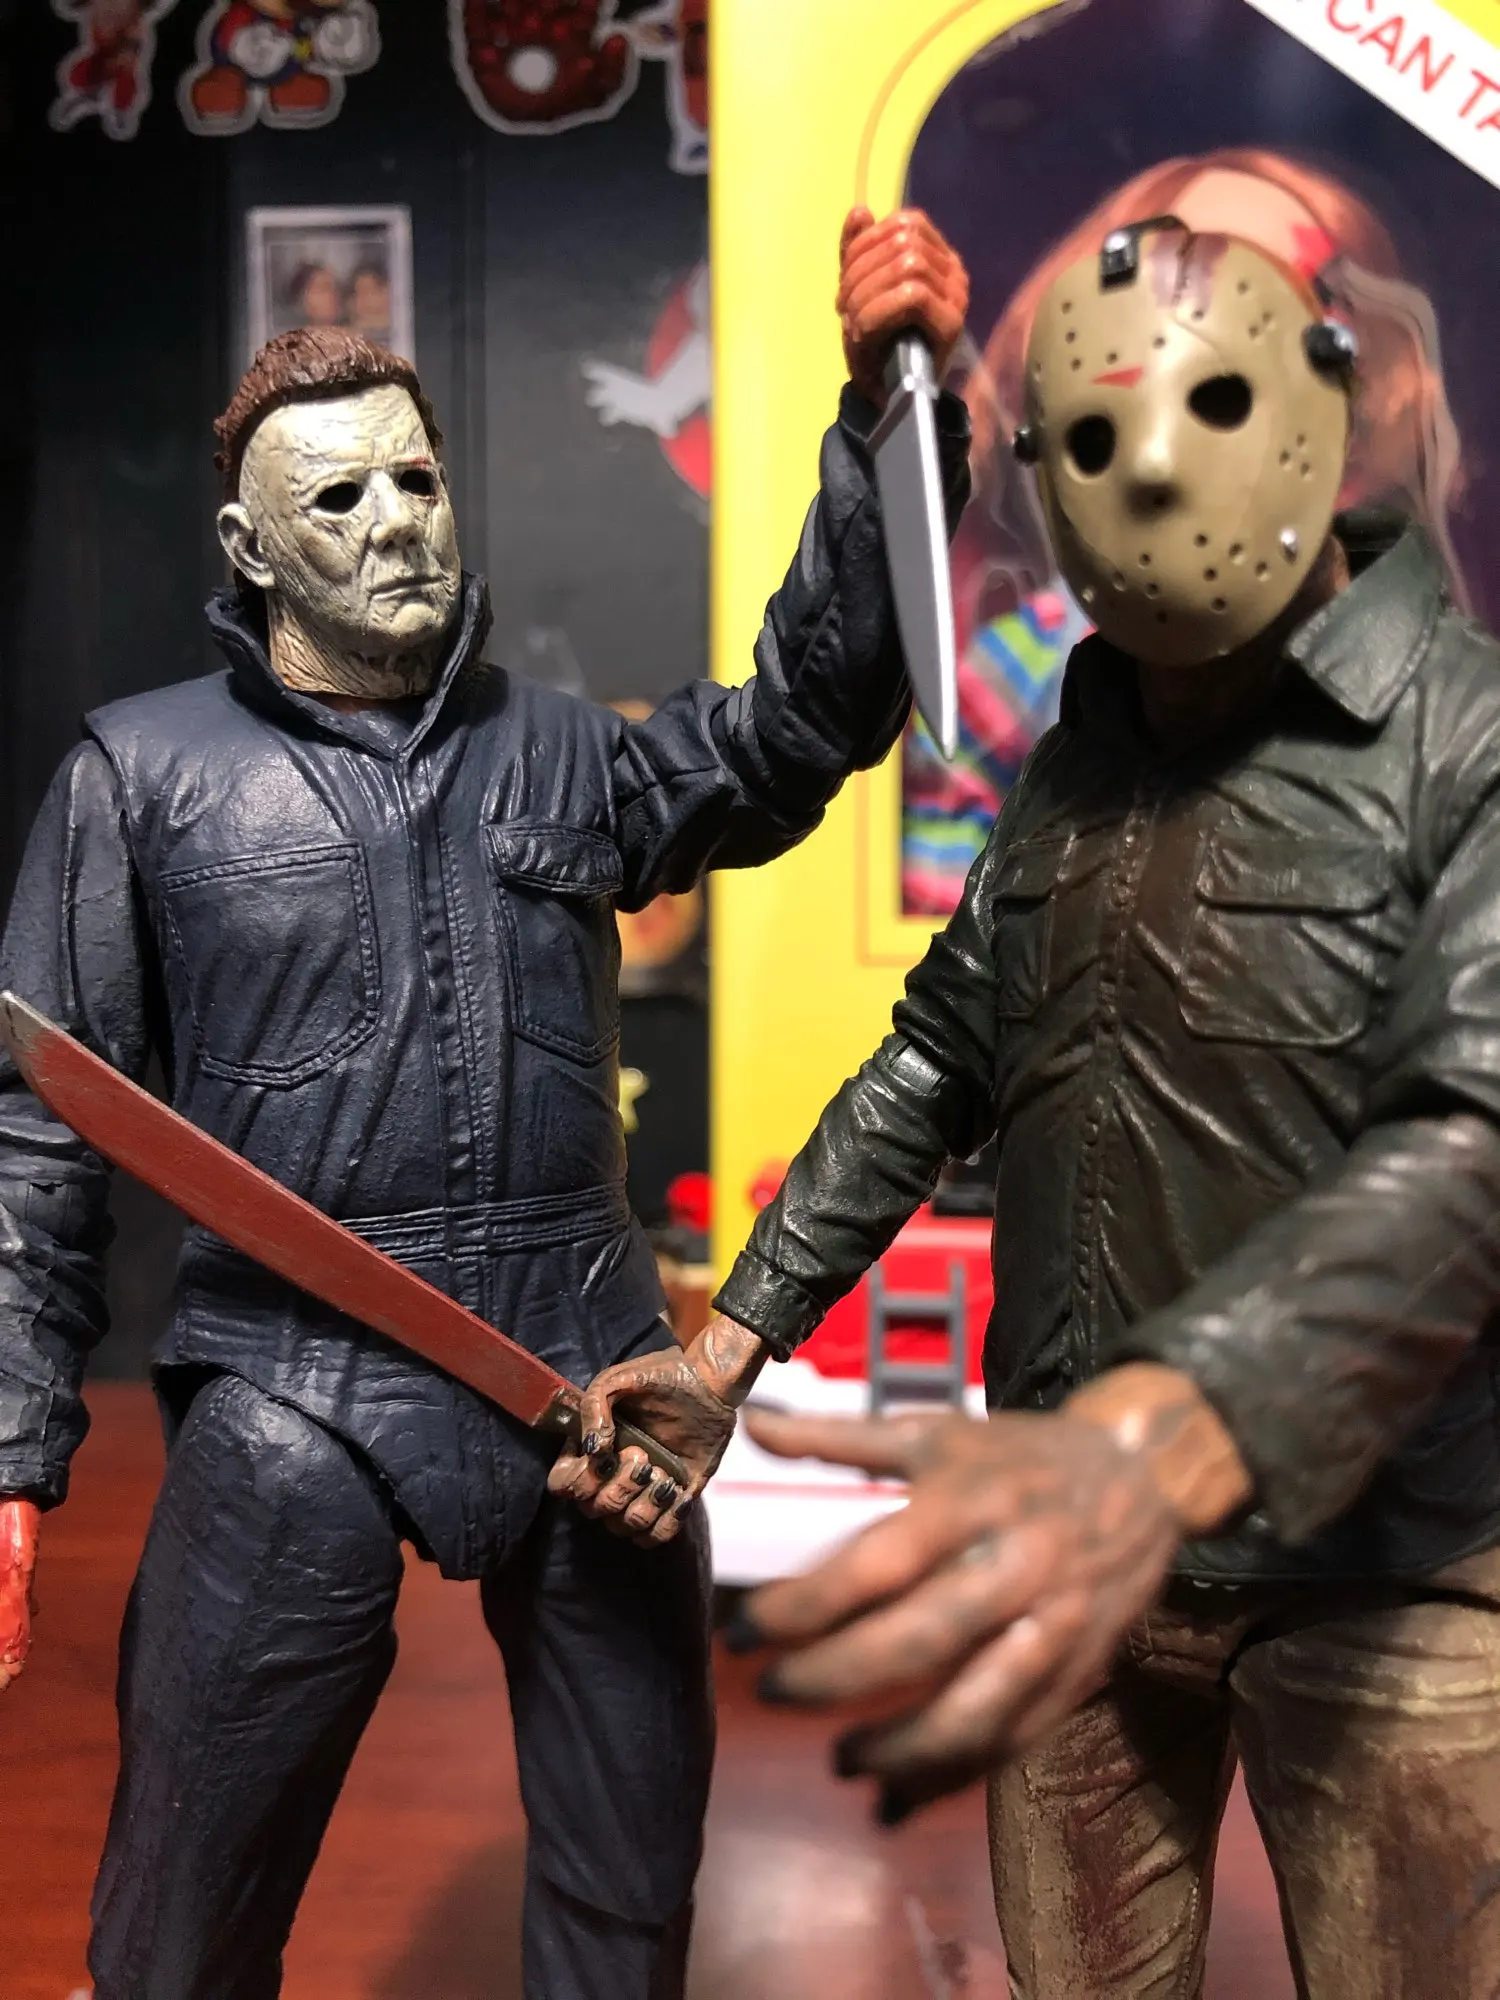 Details about   NECA Halloween 2 Ultimate Michael Myers Action Figures Joints Moveable Model Toy